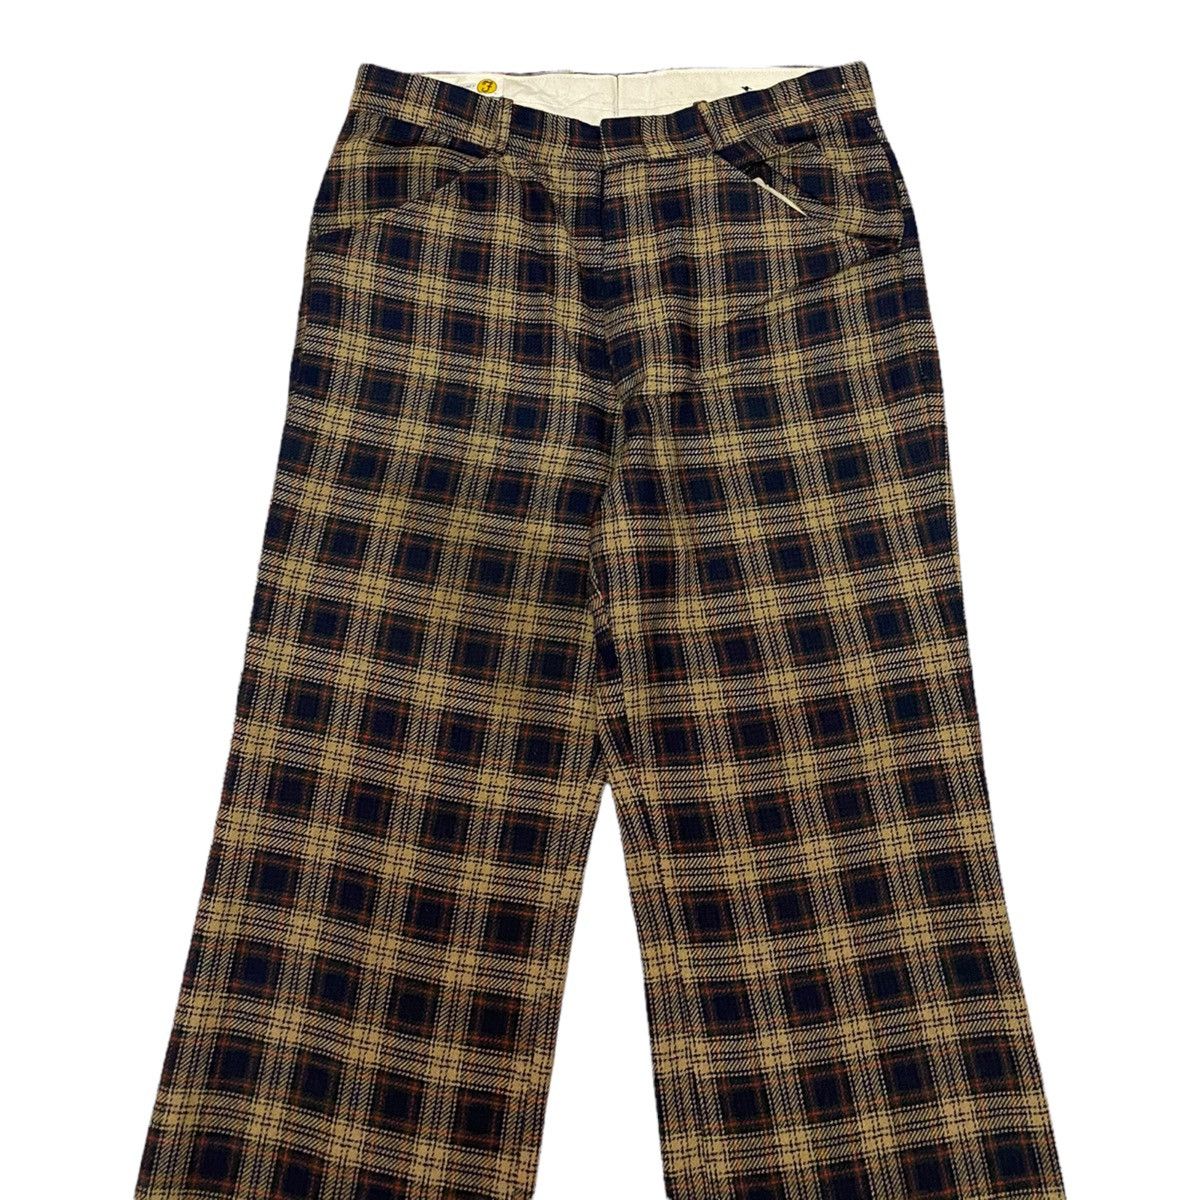 Archival Clothing - 🔥FARAH AW1998 CHECKED PLAID WOOL PANTS MADE IN ITALY - 7